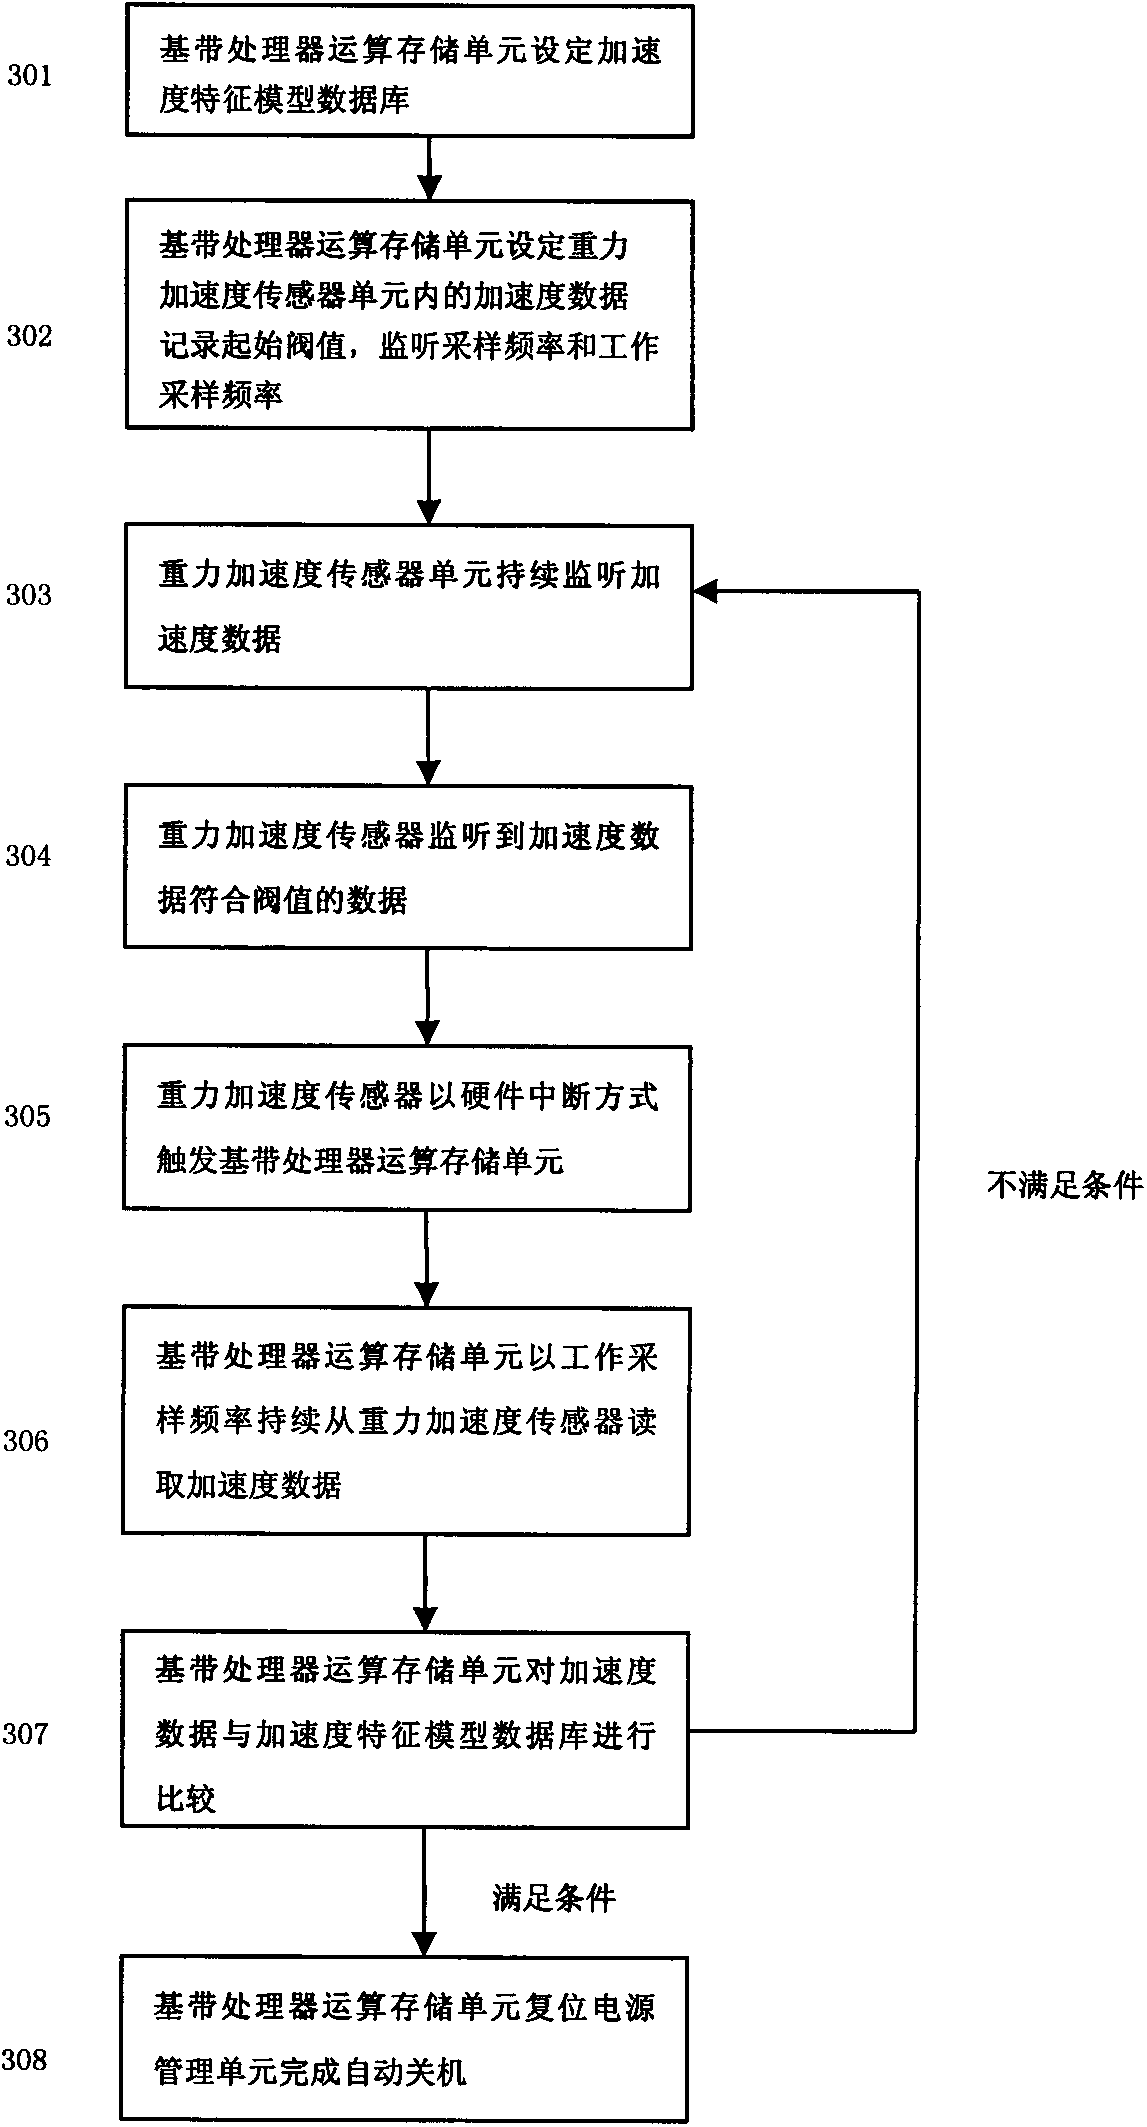 Automatic shutdown method for mobile communication terminal in civil aircraft